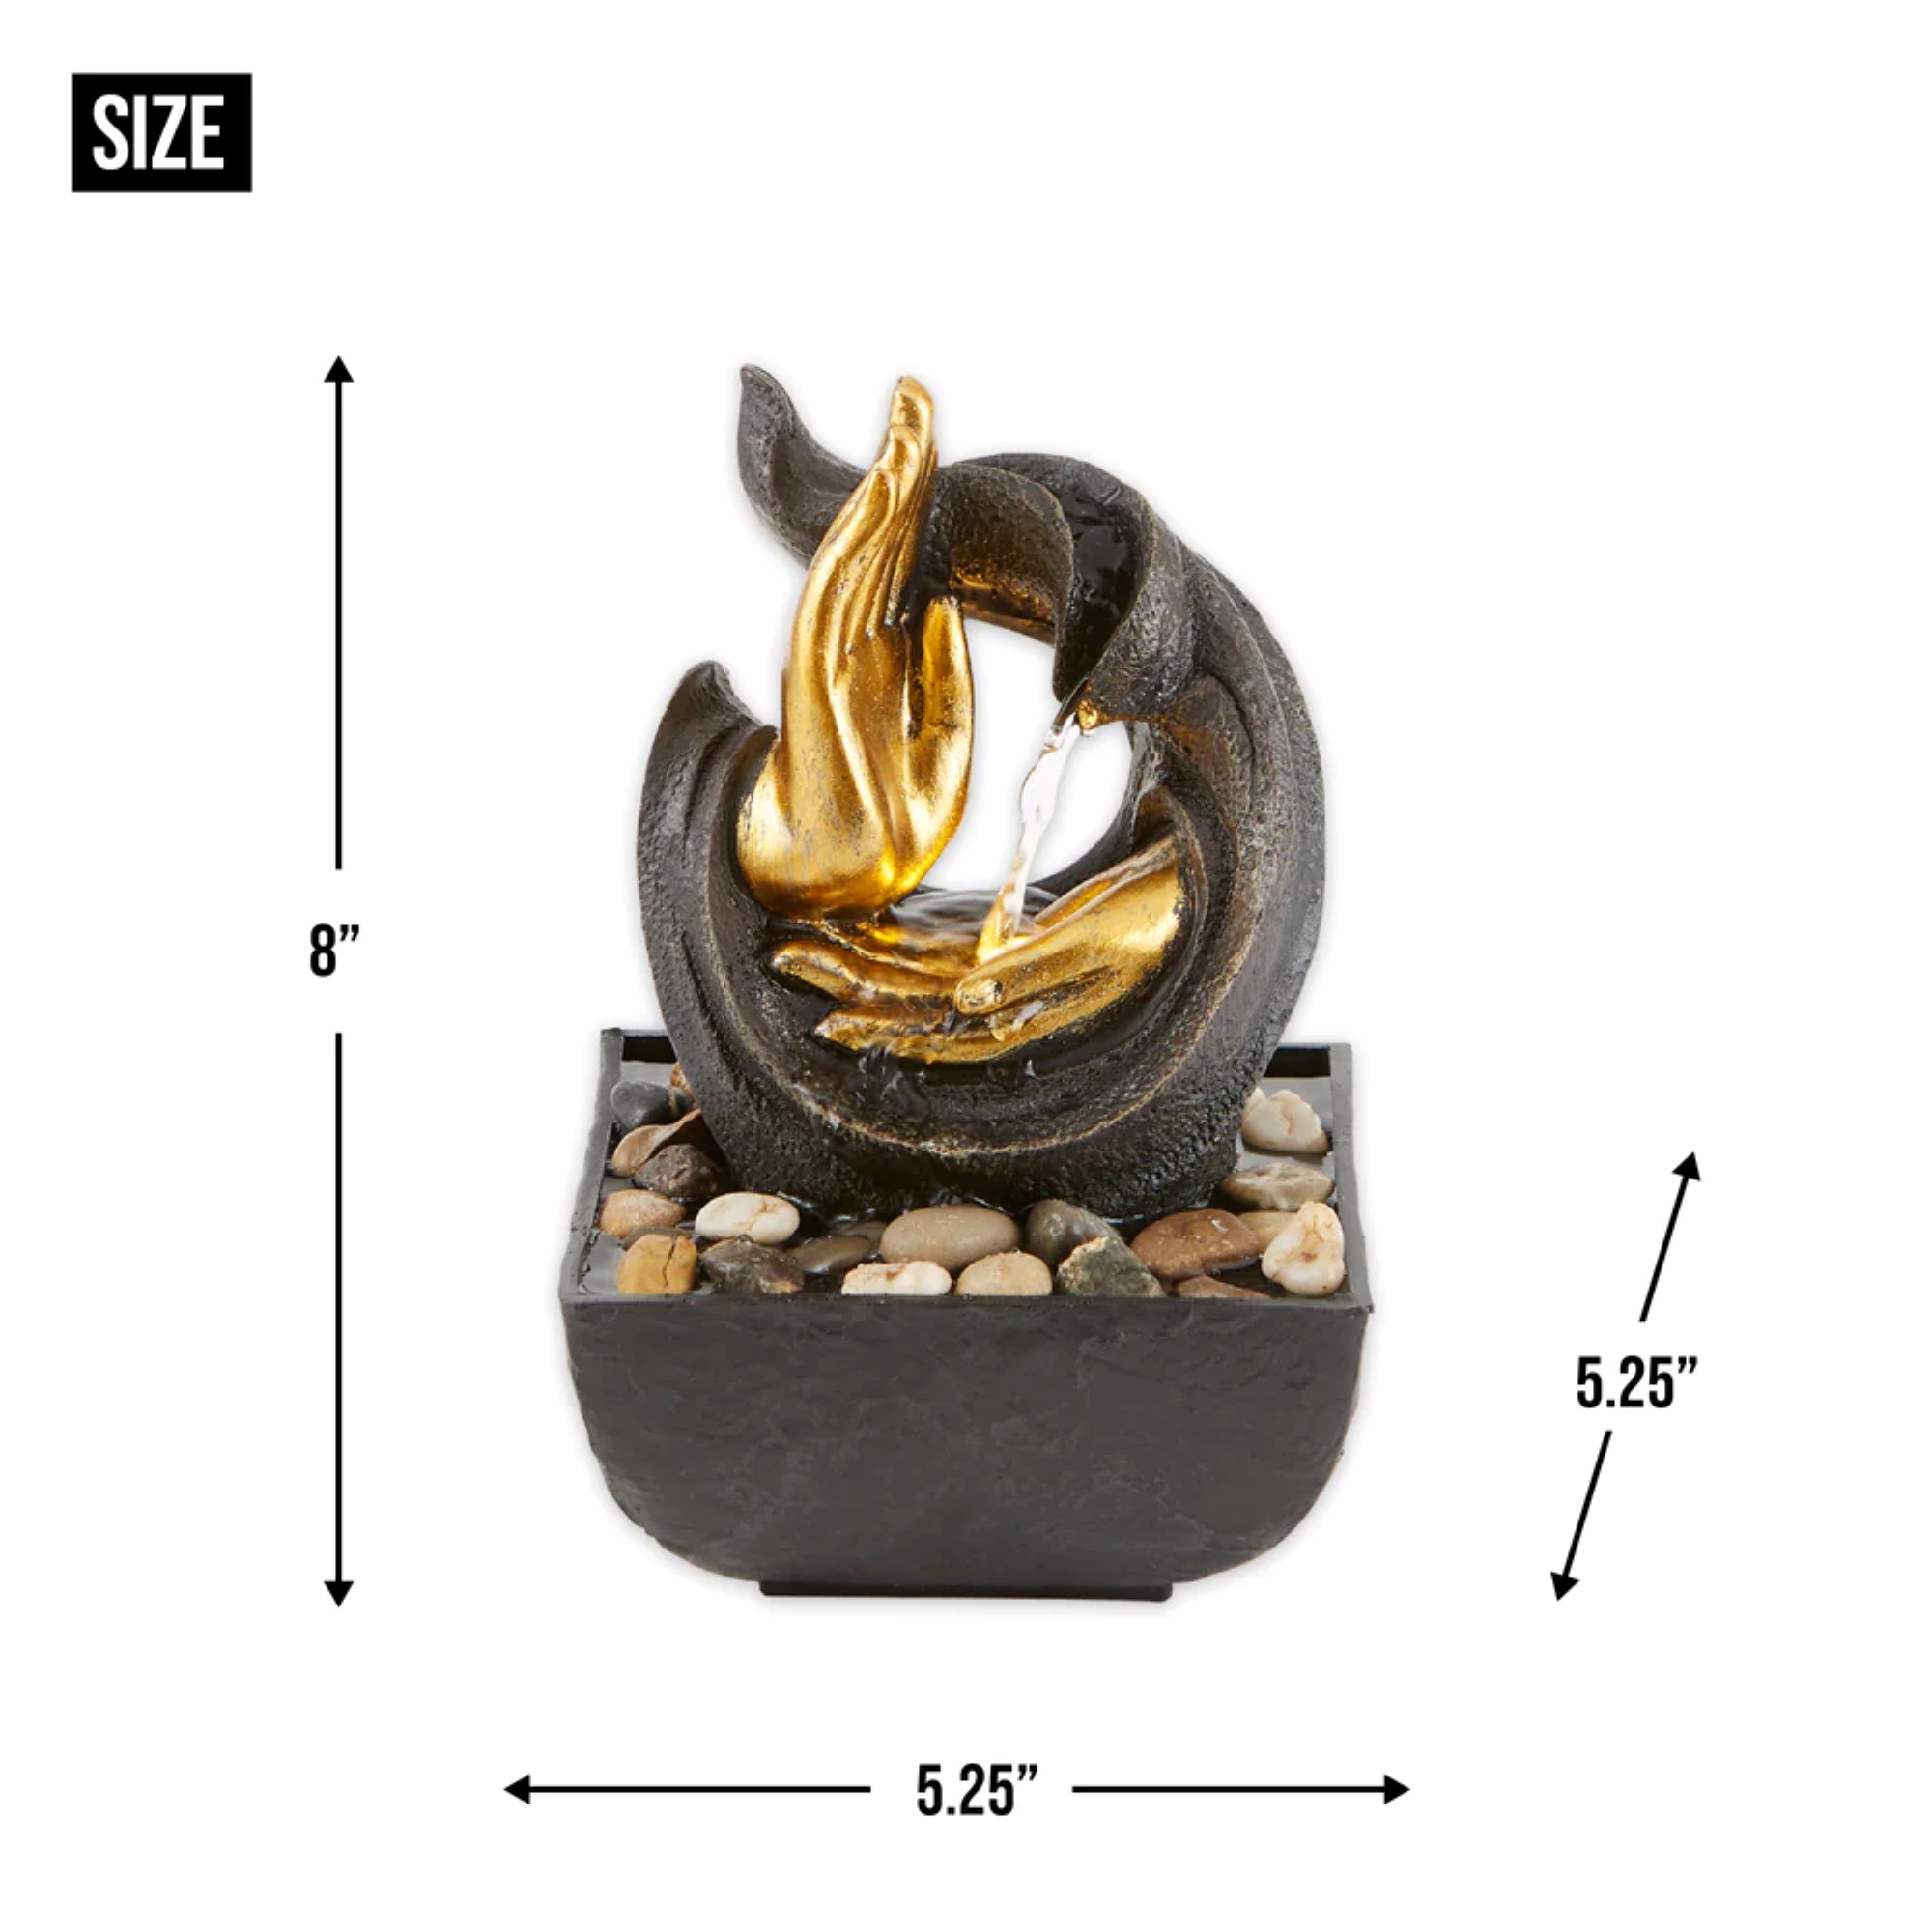 Zingz & Thingz Hands Accent Water Tabletop Fountain - 8" - Black and Gold